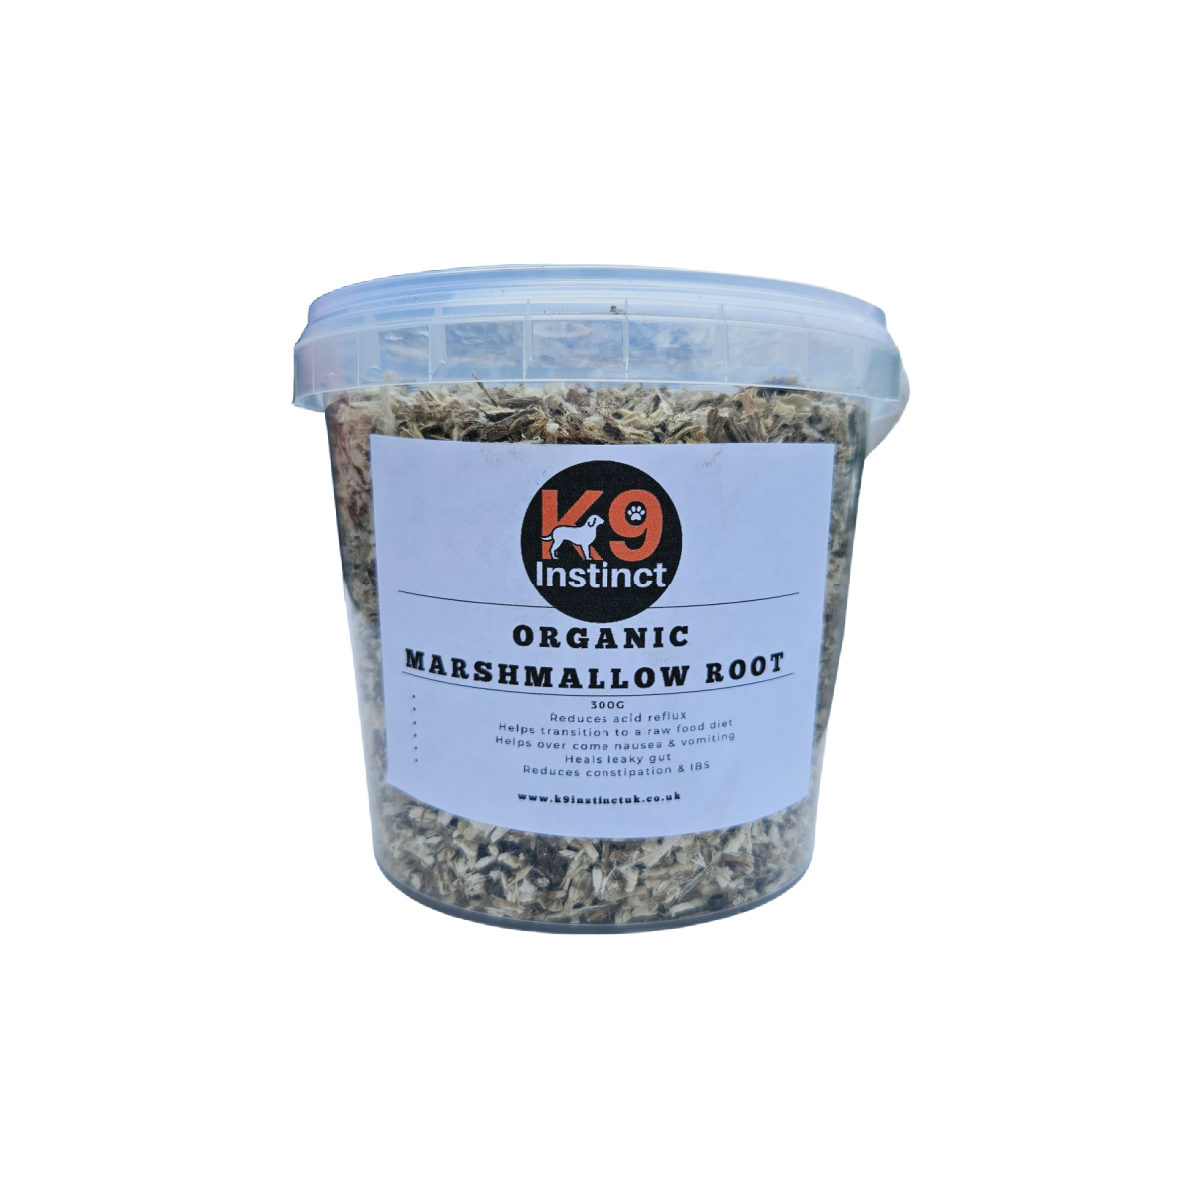 Natural K9 Instinkt food supplement for dogs - marshmallow root.